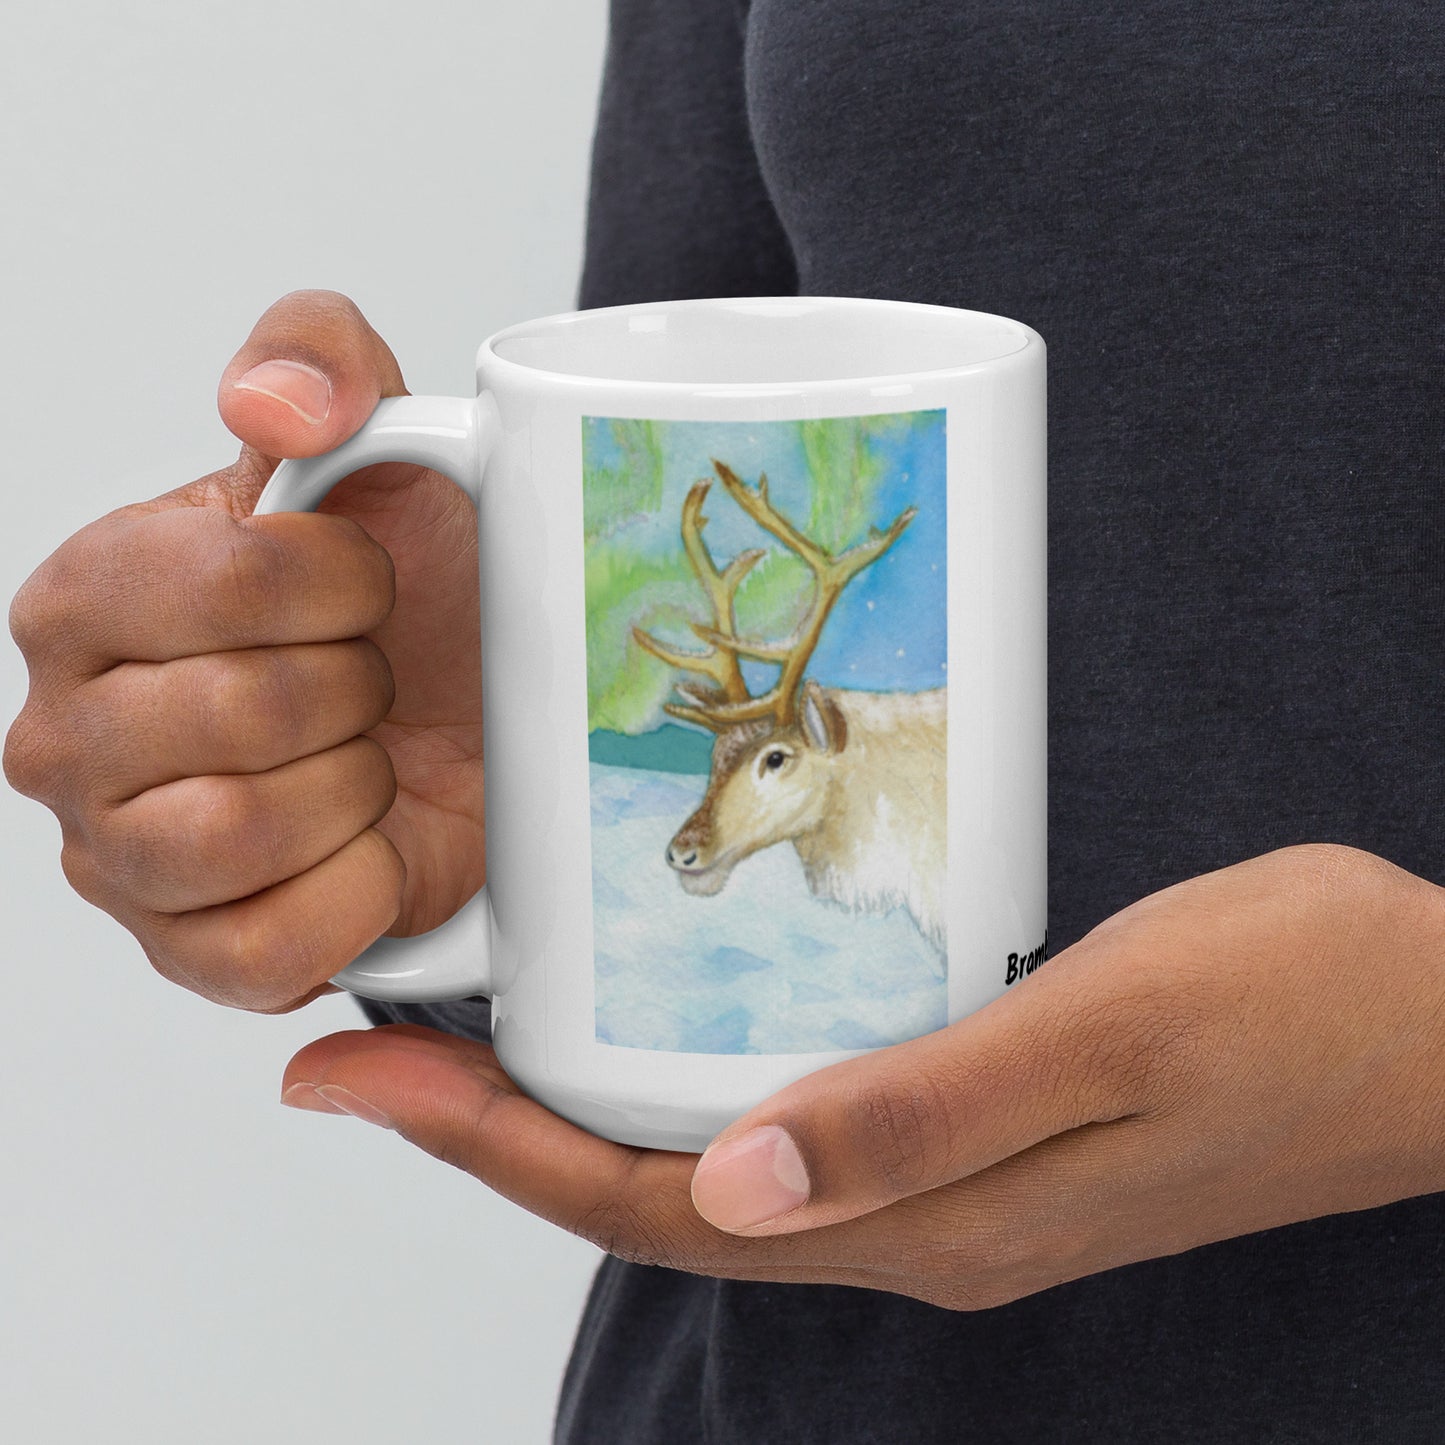 15 ounce ceramic mug featuring Northern Lights reindeer design. Double-sided print. Dishwasher and microwave safe. Shown in model's hands.